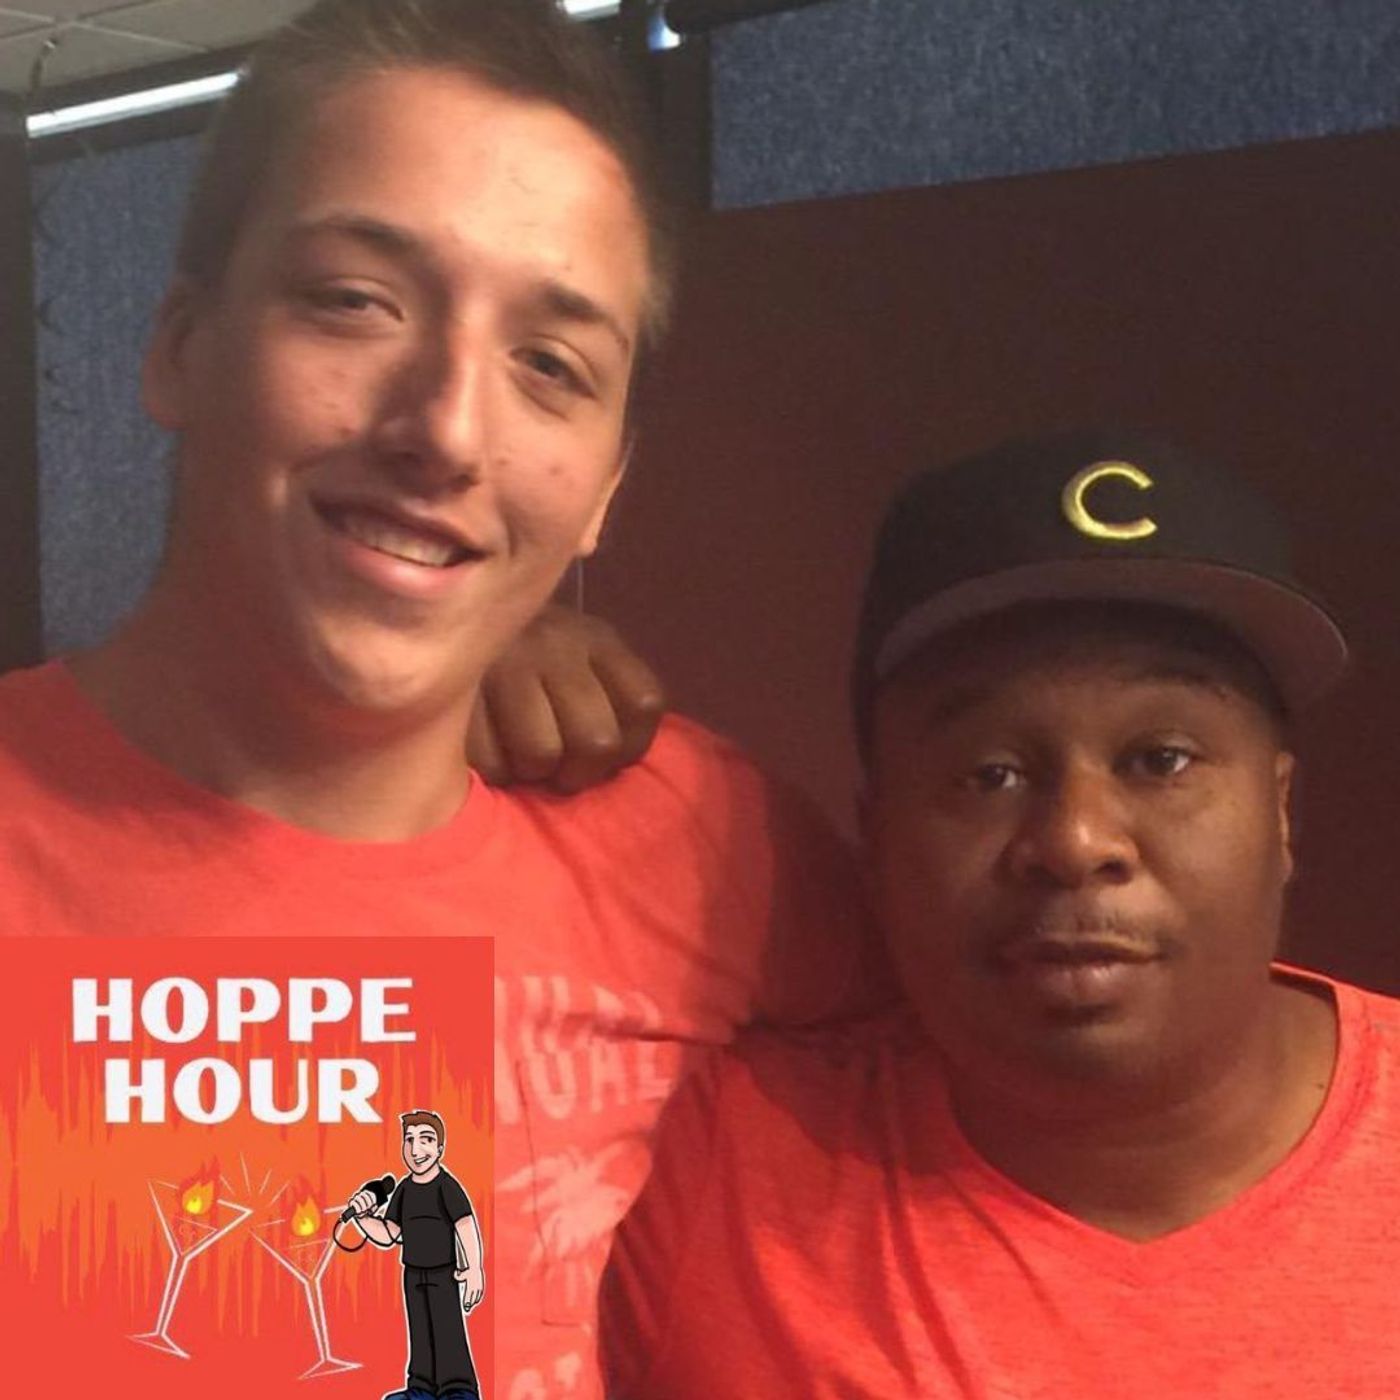 Roy Wood JR. Calls Into Hoppe Hour With Ryan Hoppe